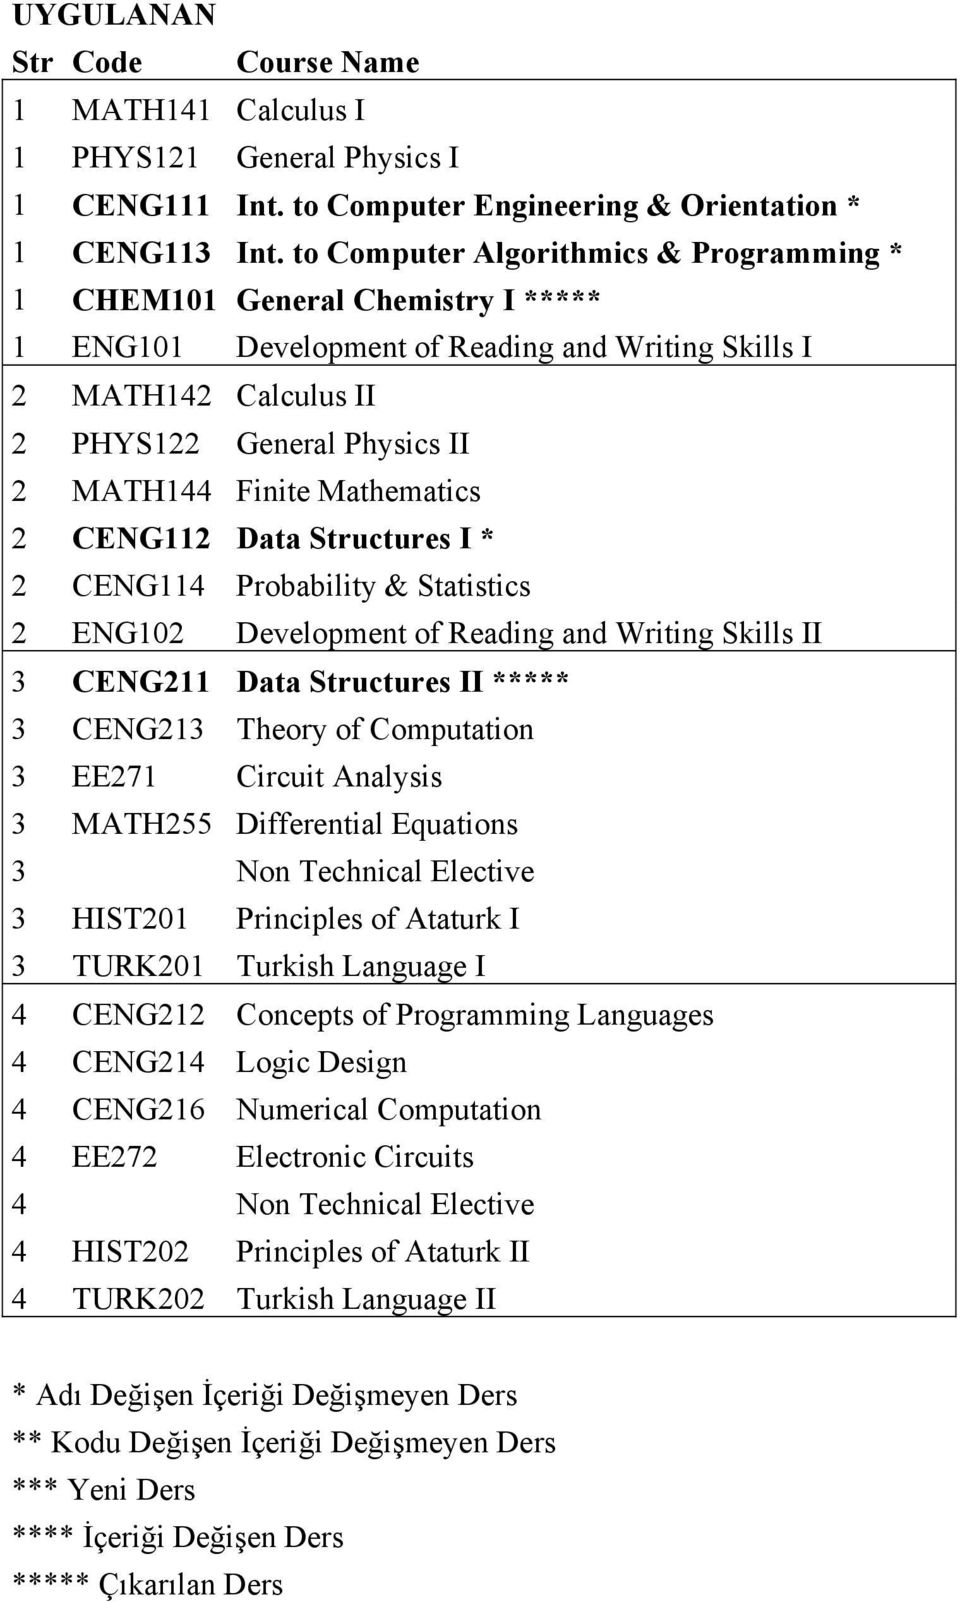 Mathematics 2 CENG112 Data Structures I * 2 CENG114 Probability & Statistics 2 ENG102 Development of Reading and Writing Skills II 3 CENG211 Data Structures II ***** 3 CENG213 Theory of Computation 3